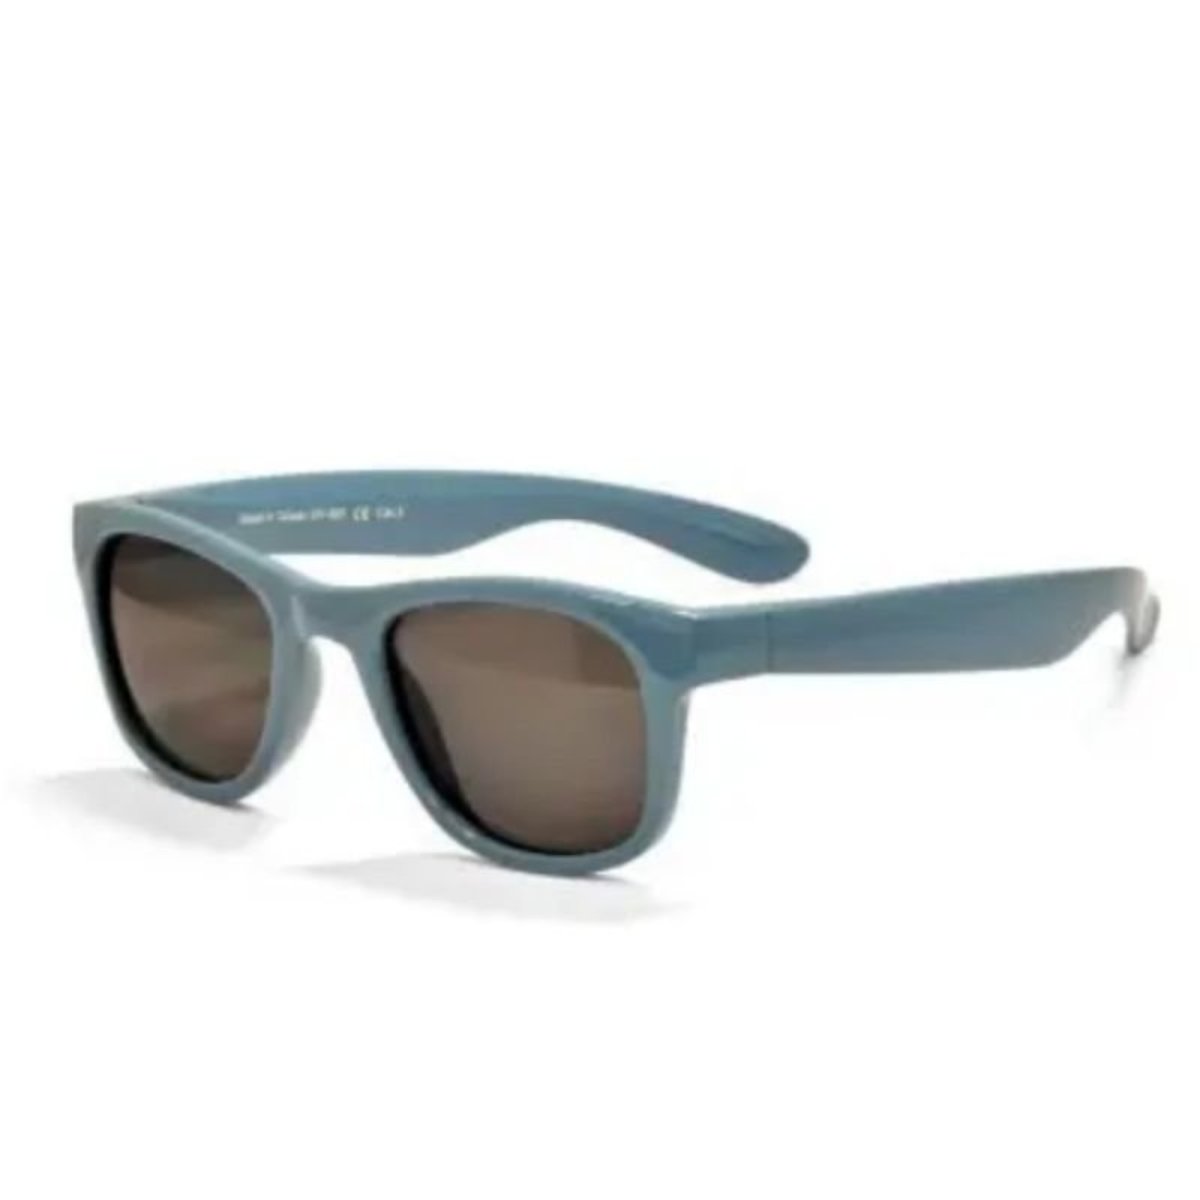 Real Shades - UV sunglasses for kids - Surf - Steel Blue